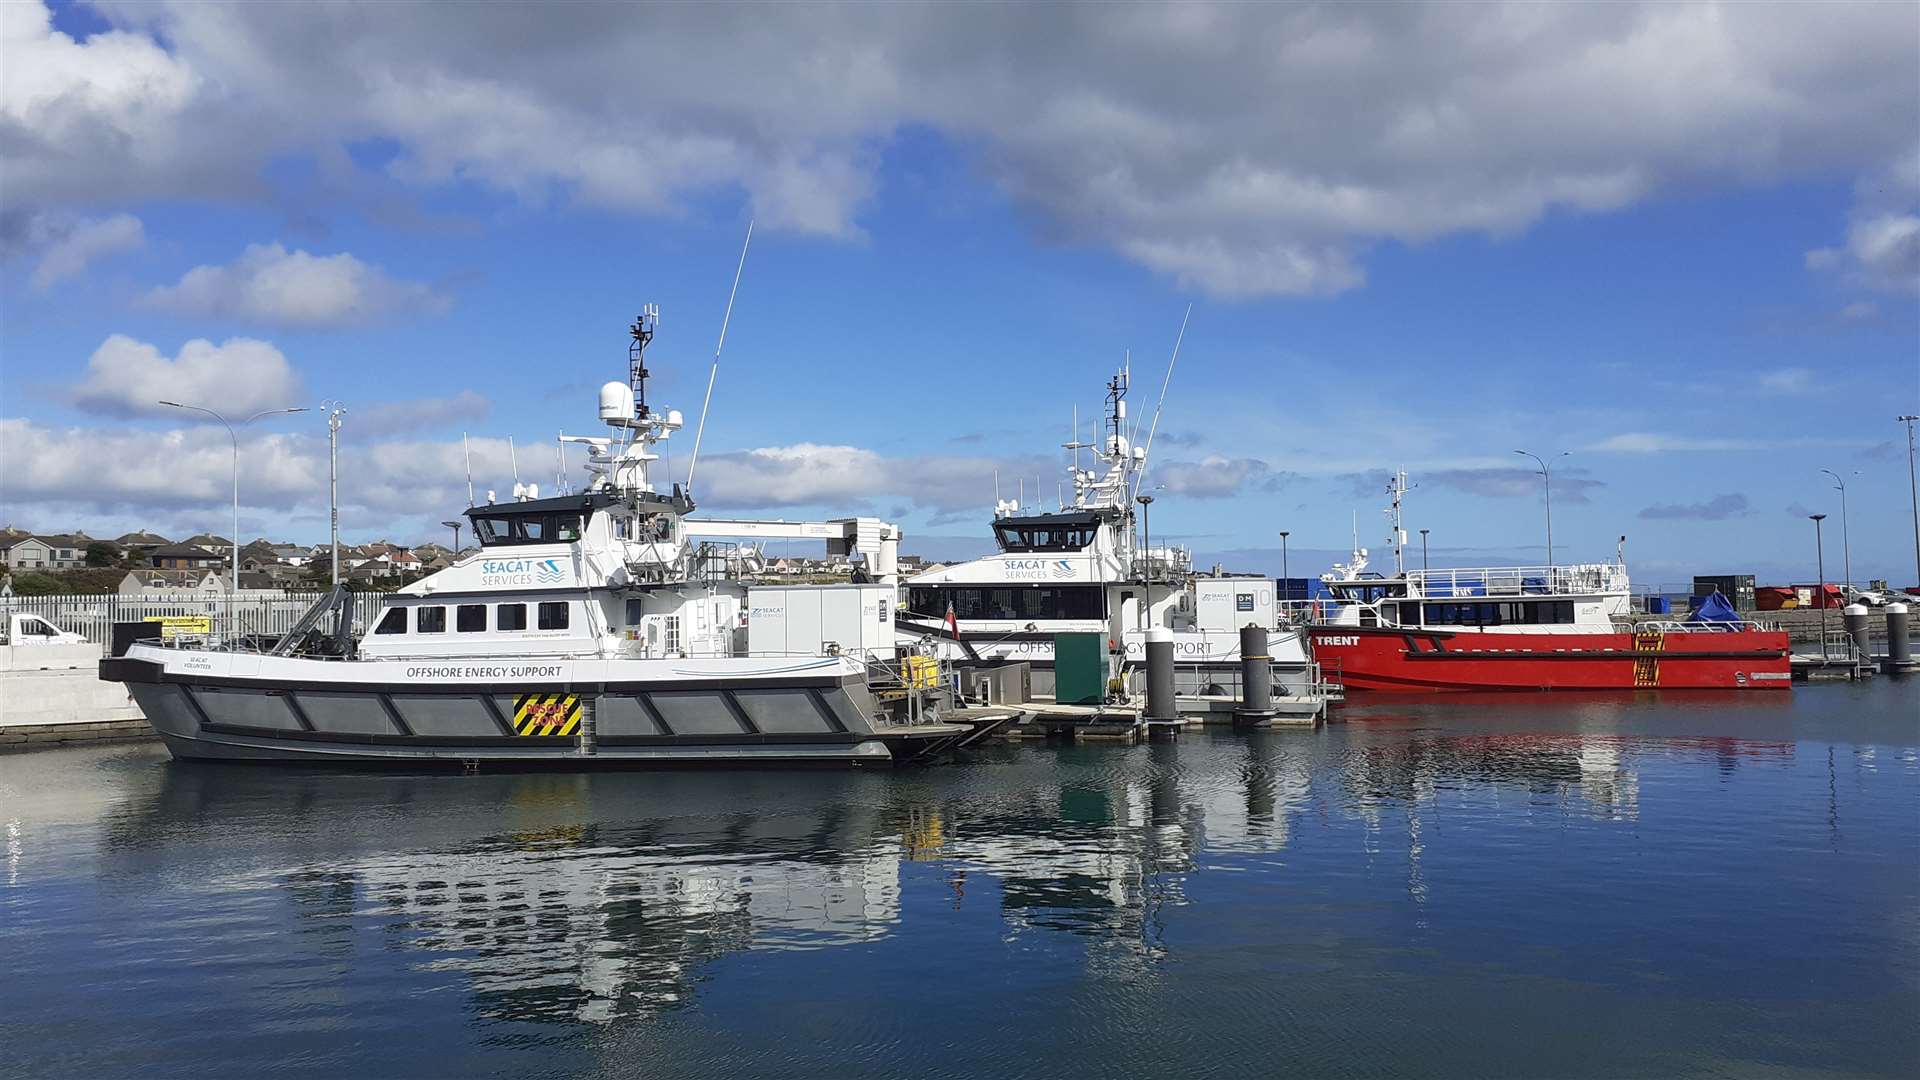 Offshore energy support vessels at Wick harbour, which is the operations and maintenance base for the Beatrice wind farm.